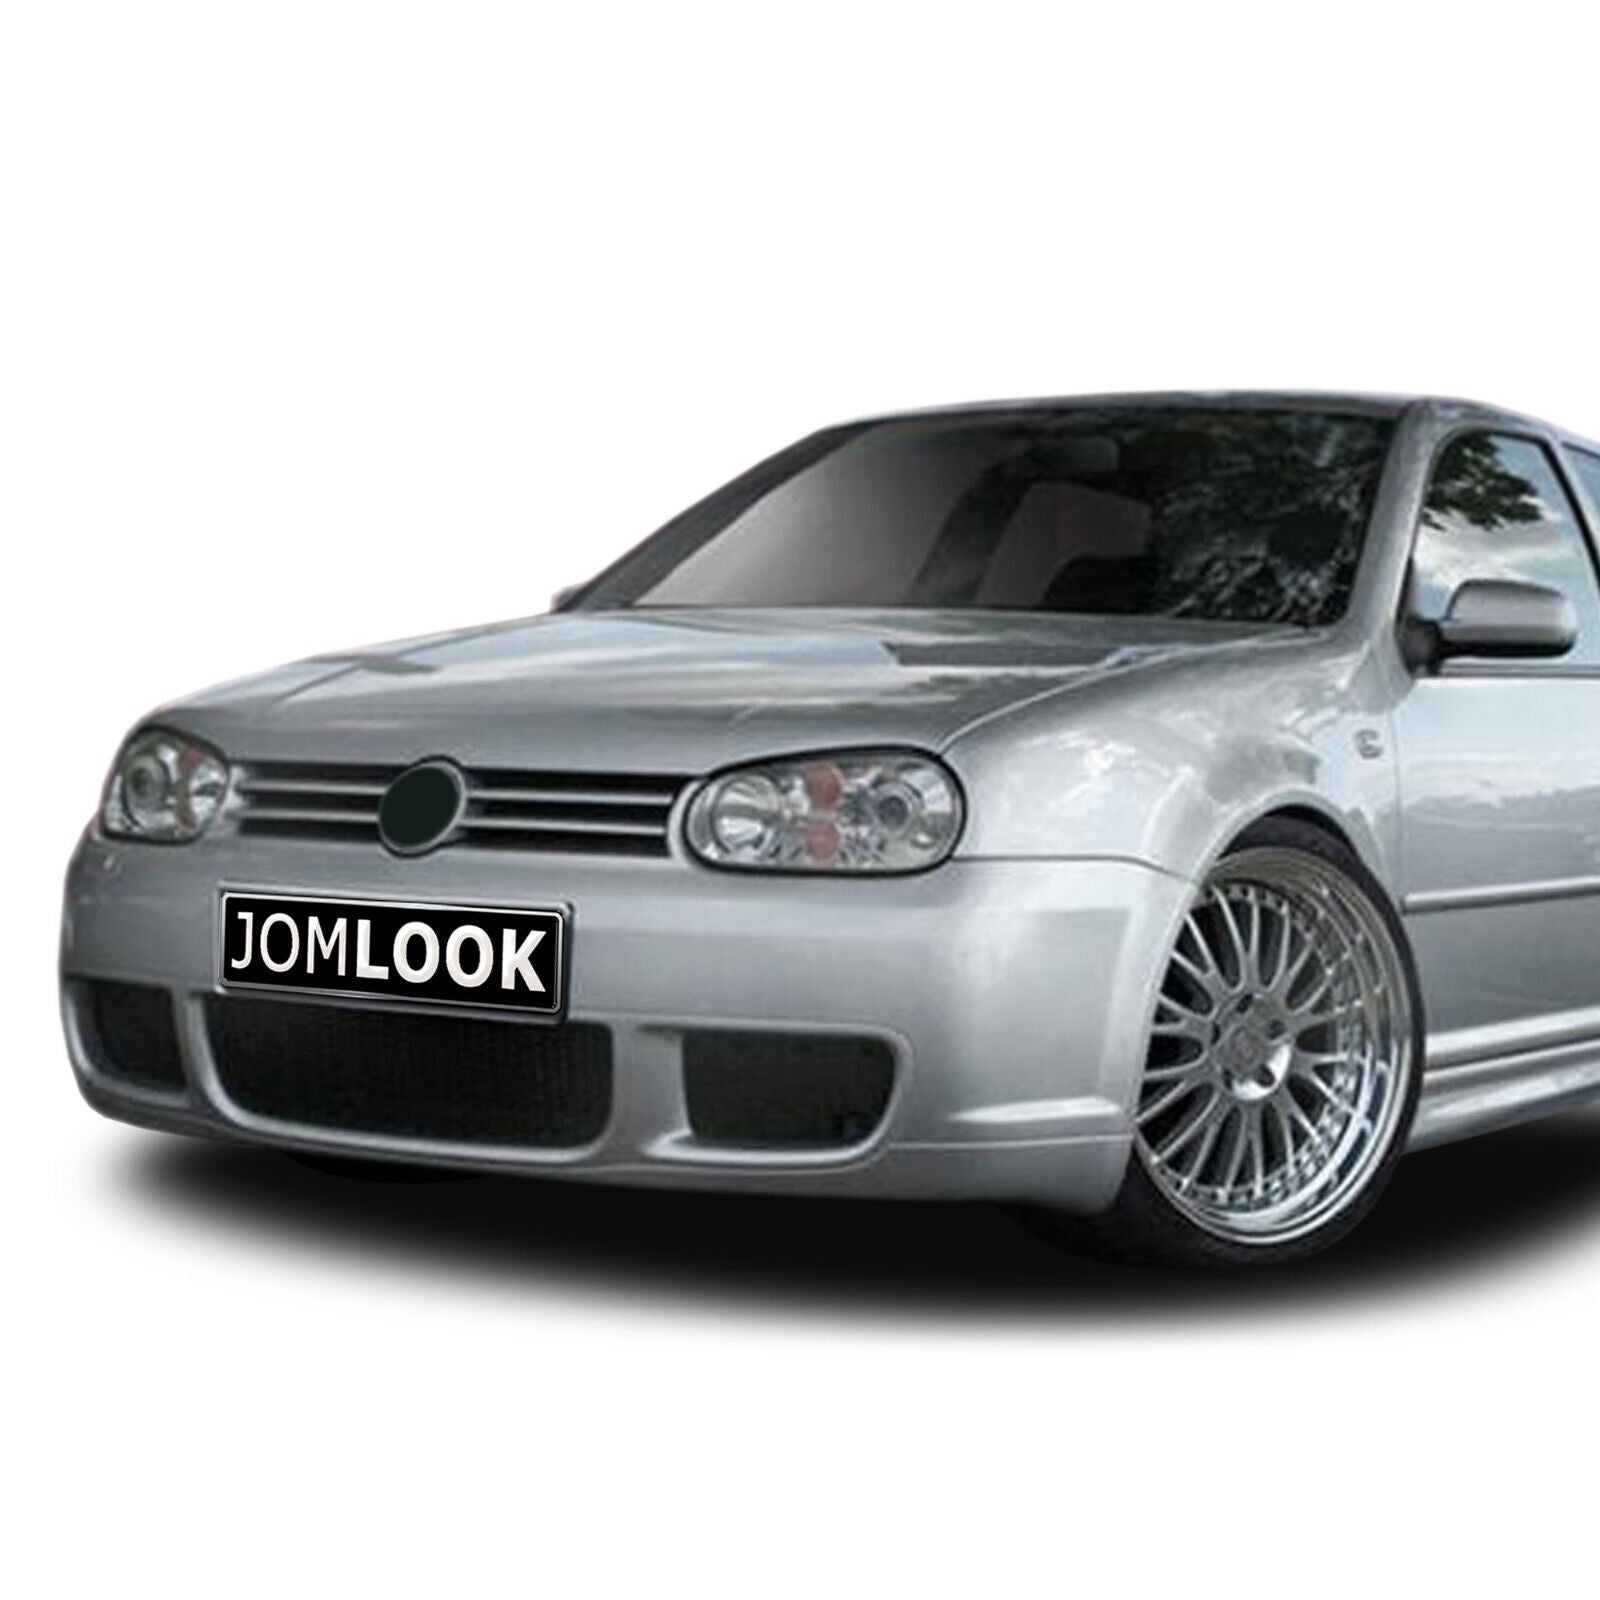 VW Golf 4 1.8T with 150 PS Tuning